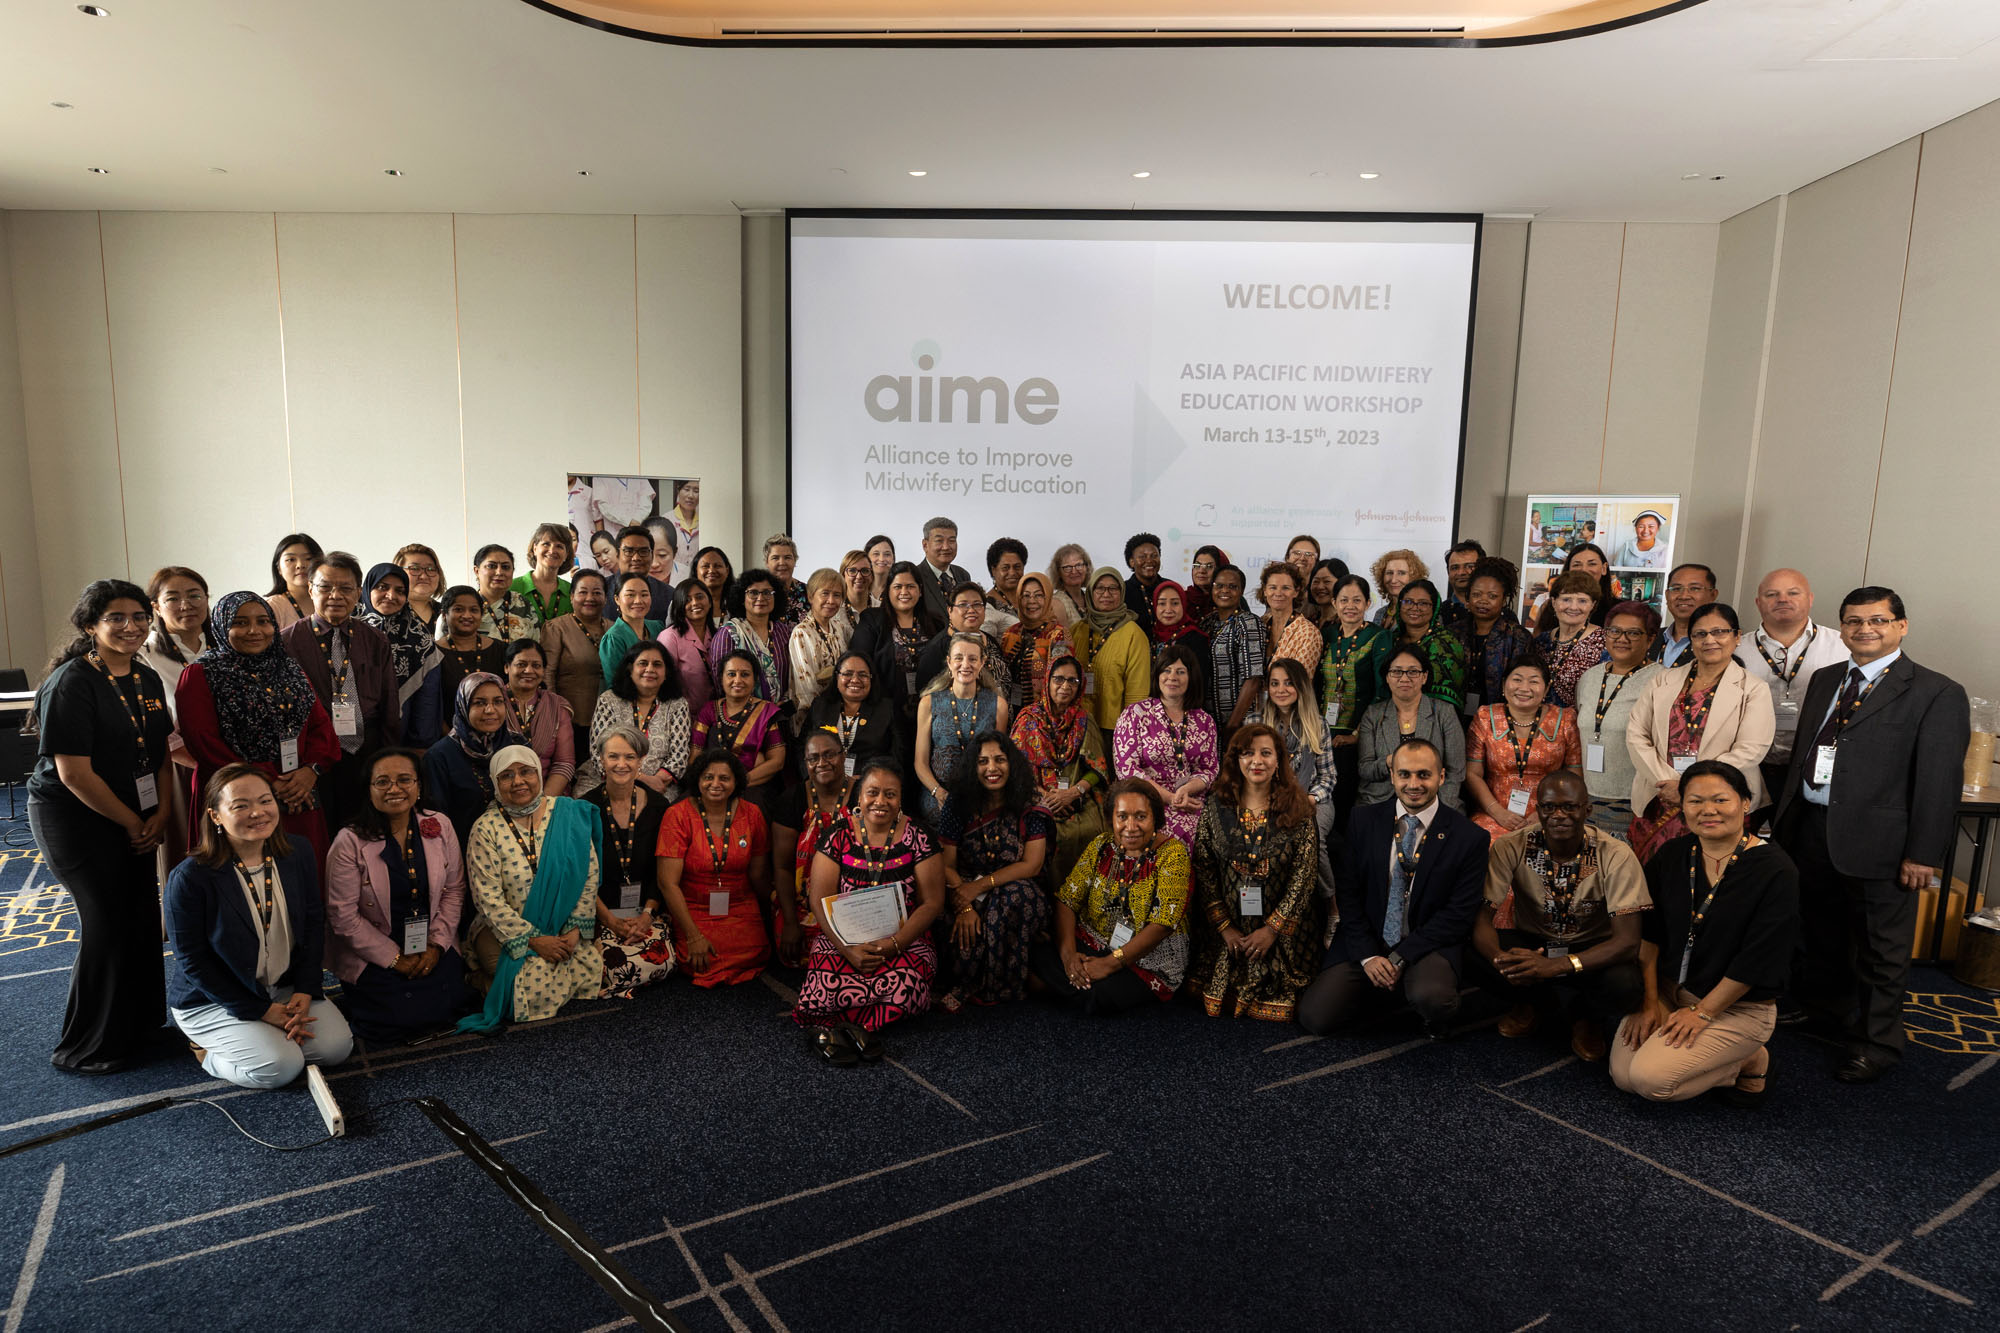 The Alliance to Improve Midwifery Education (AIME) partners and midwifery educators  and UNFPA staff gathered at the Asia-Pacific Regional Midwifery Education workshop